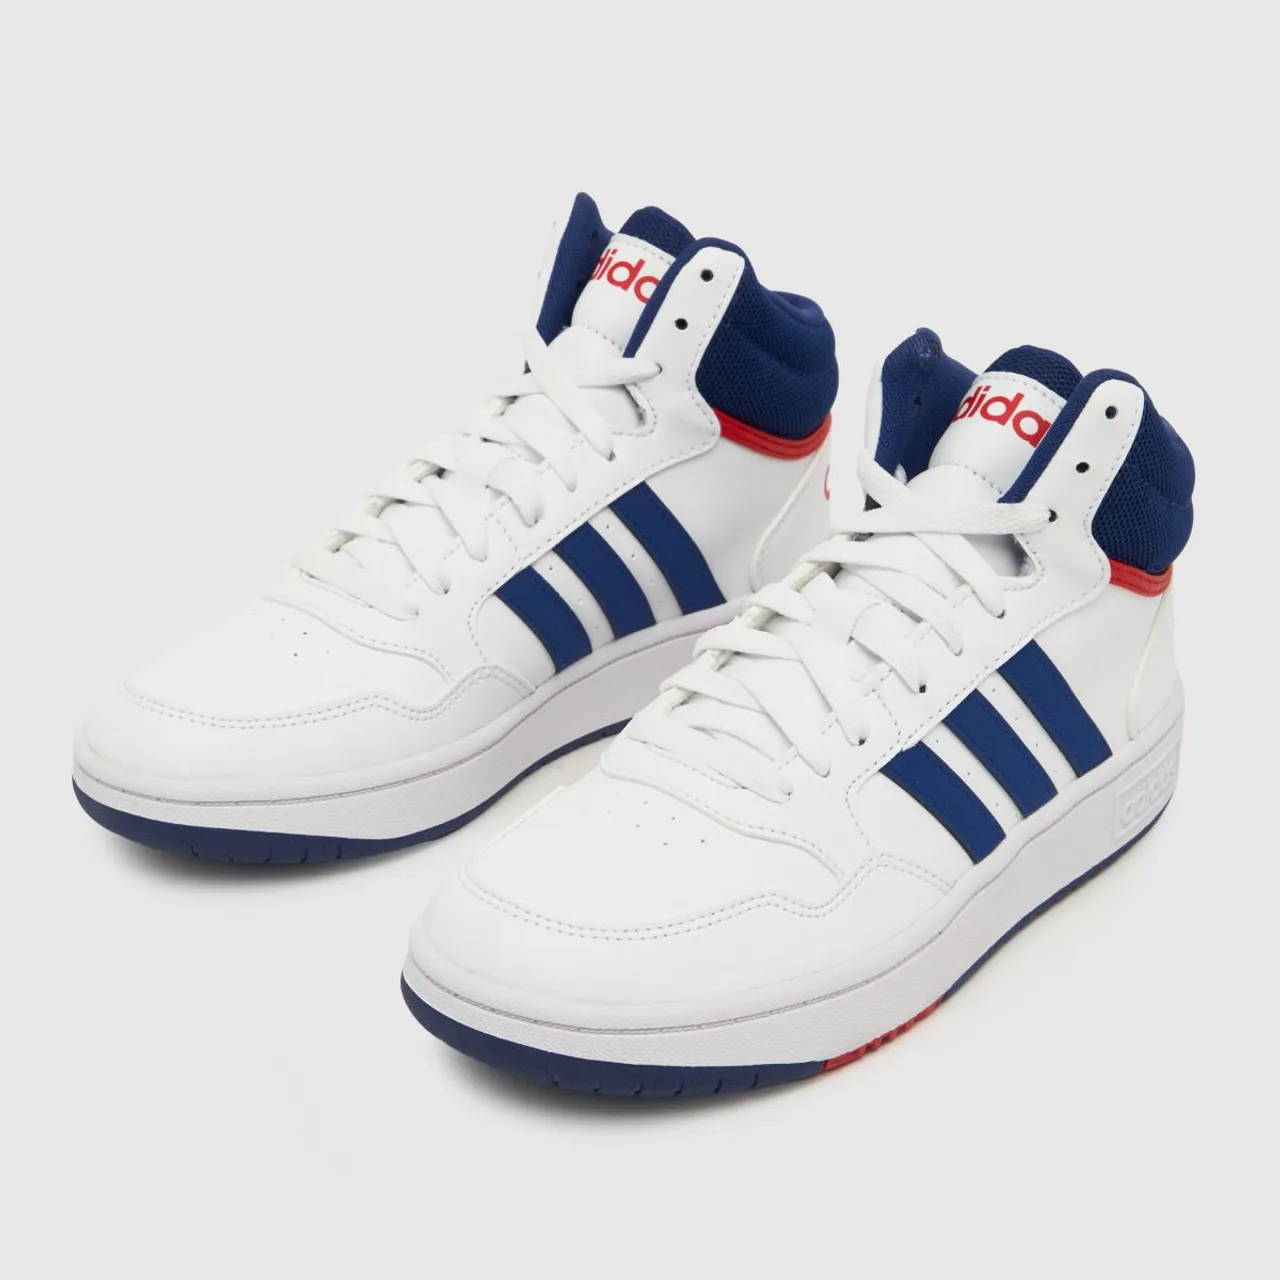 Adidas White & Navy Hoops Mid 3.0 Boys Youth Trainers